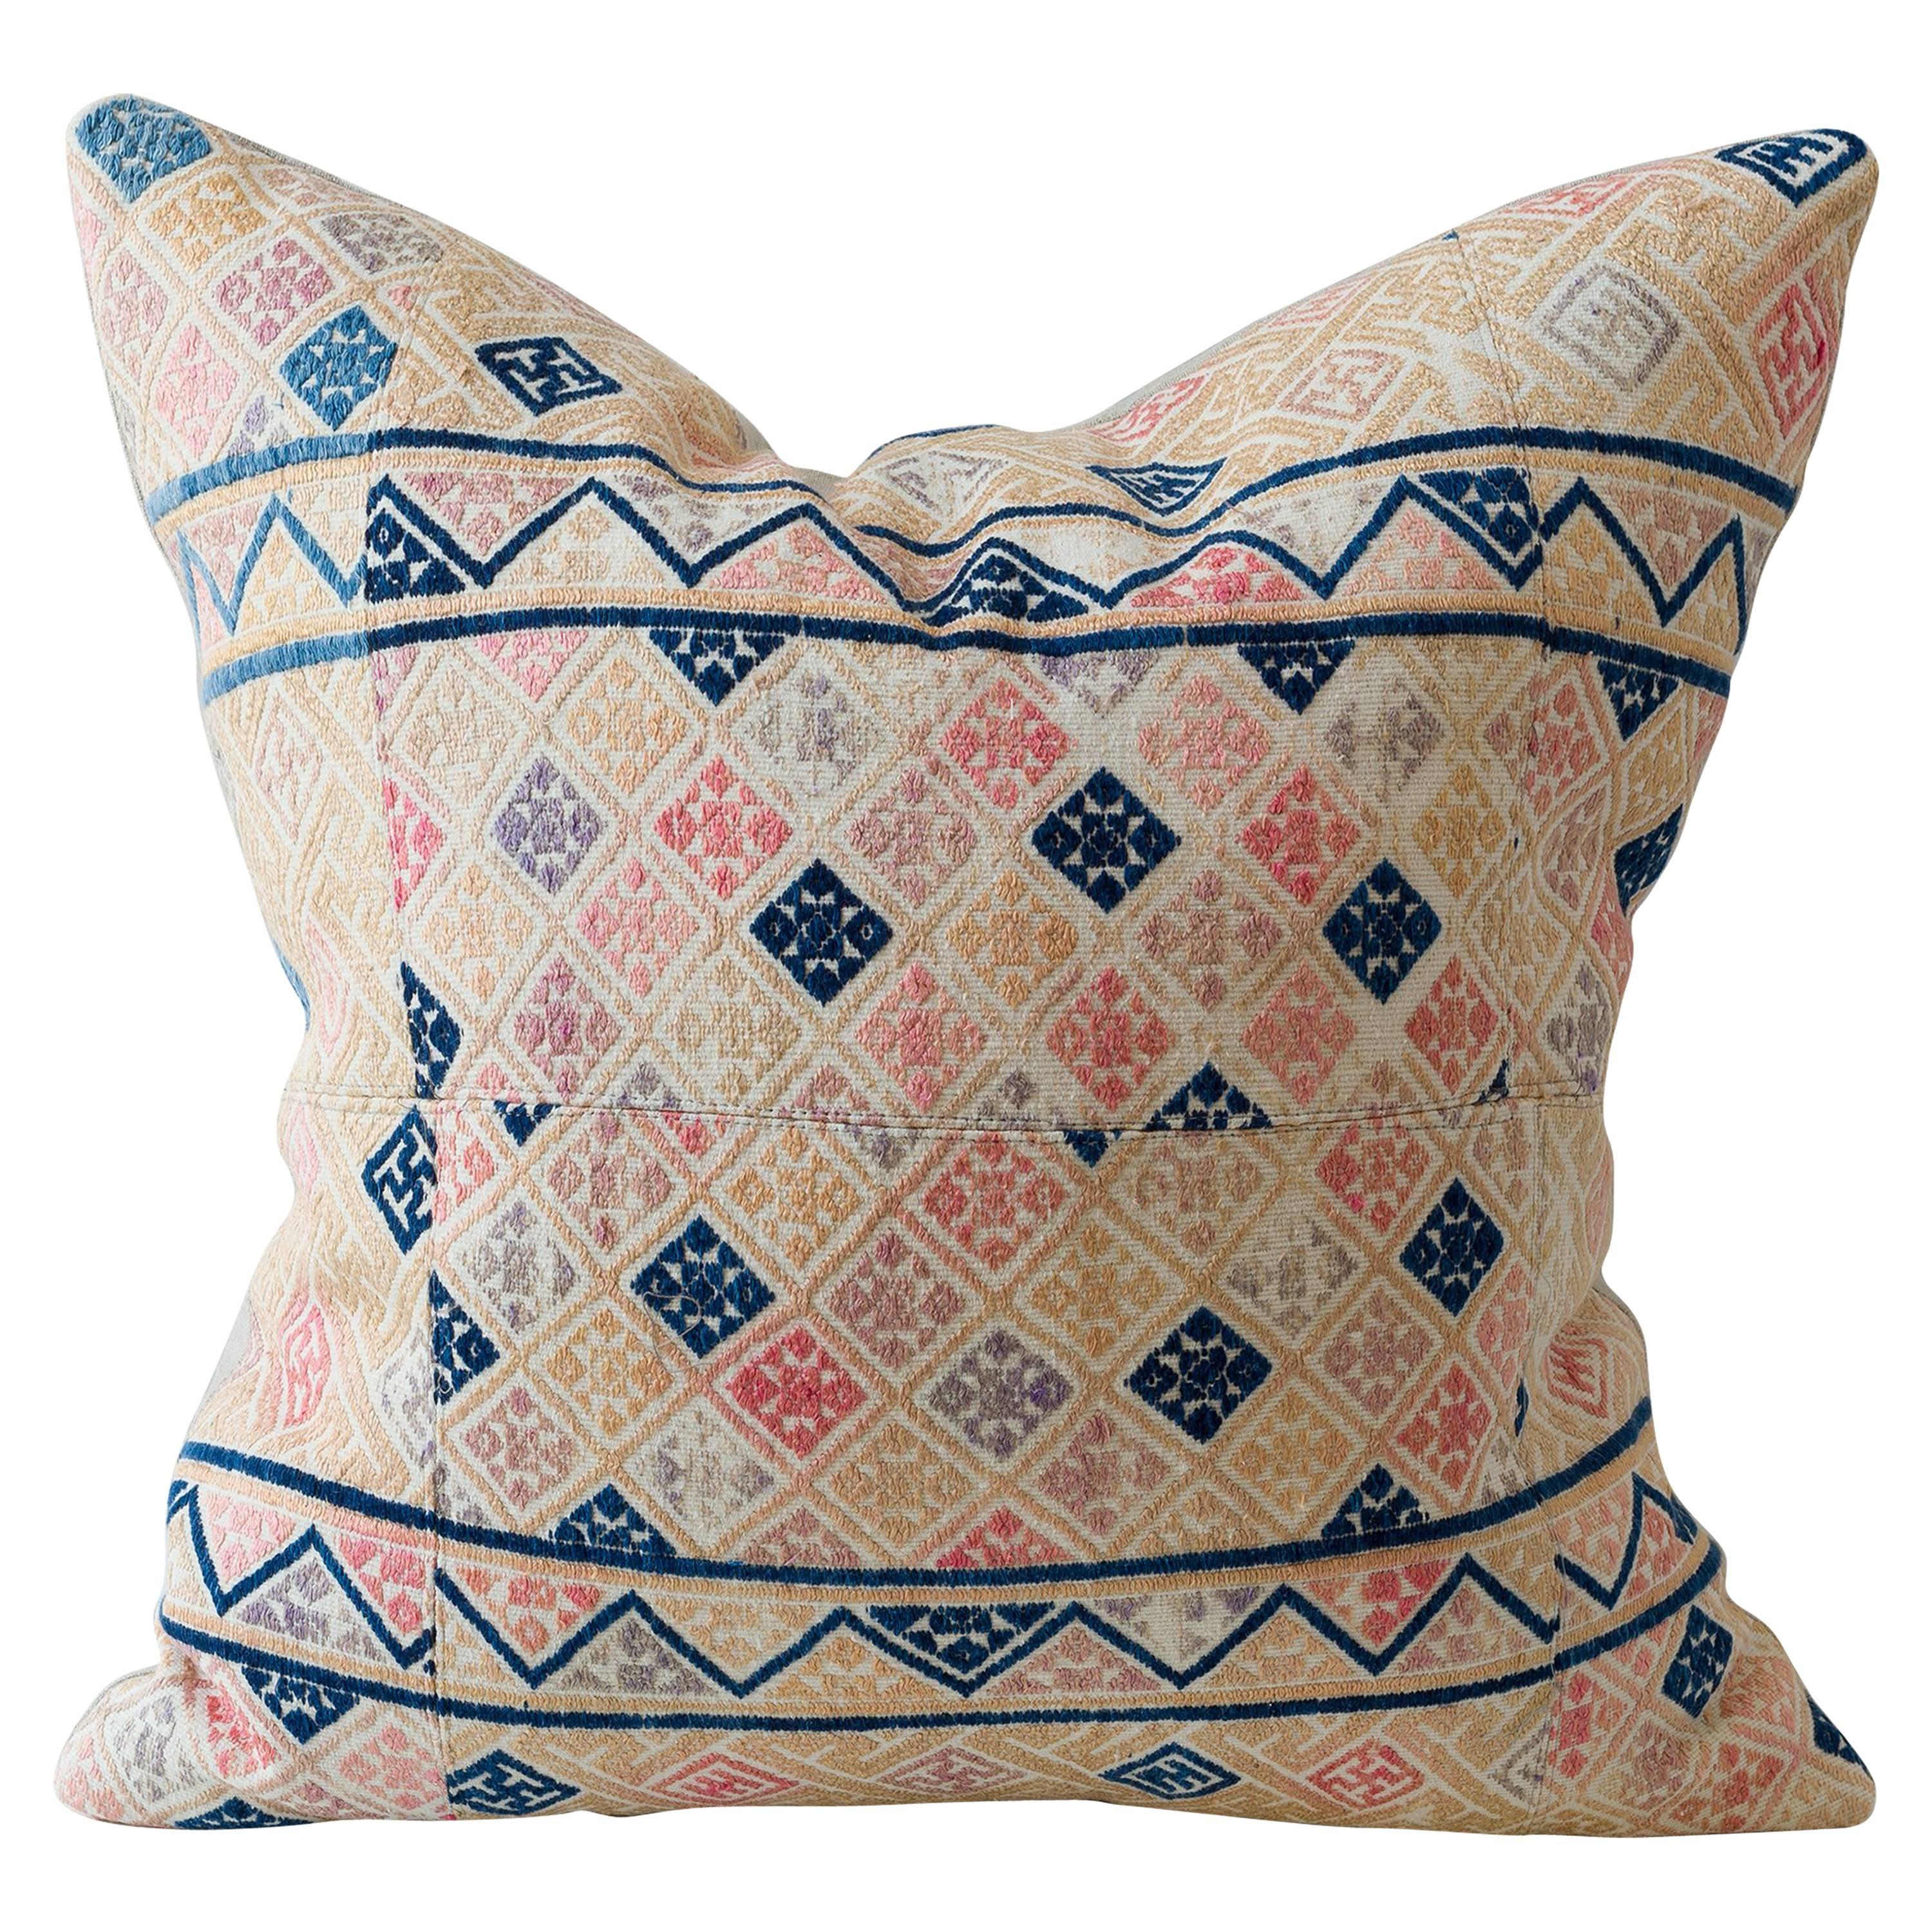 Zhuang Piecework Cushion in Pinks with Accents of Indigo For Sale